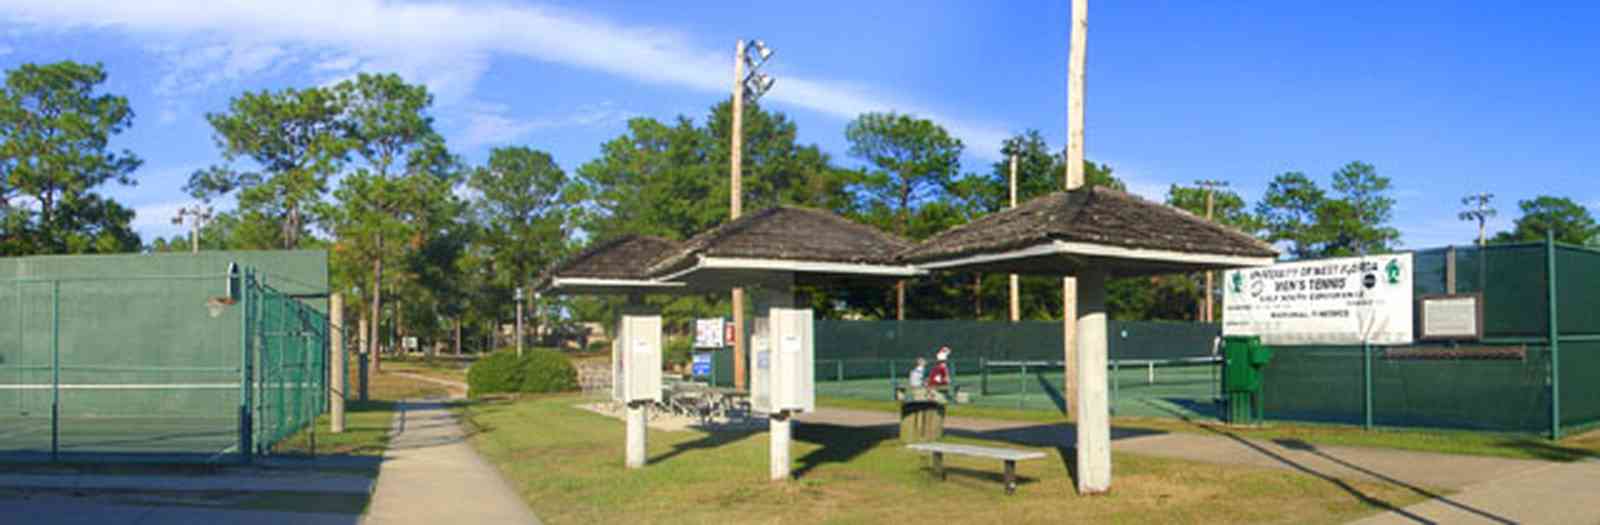 University-Of-West-Florida:-Campus_29.jpg:  university, campus, student, tennis courts, recreational facility